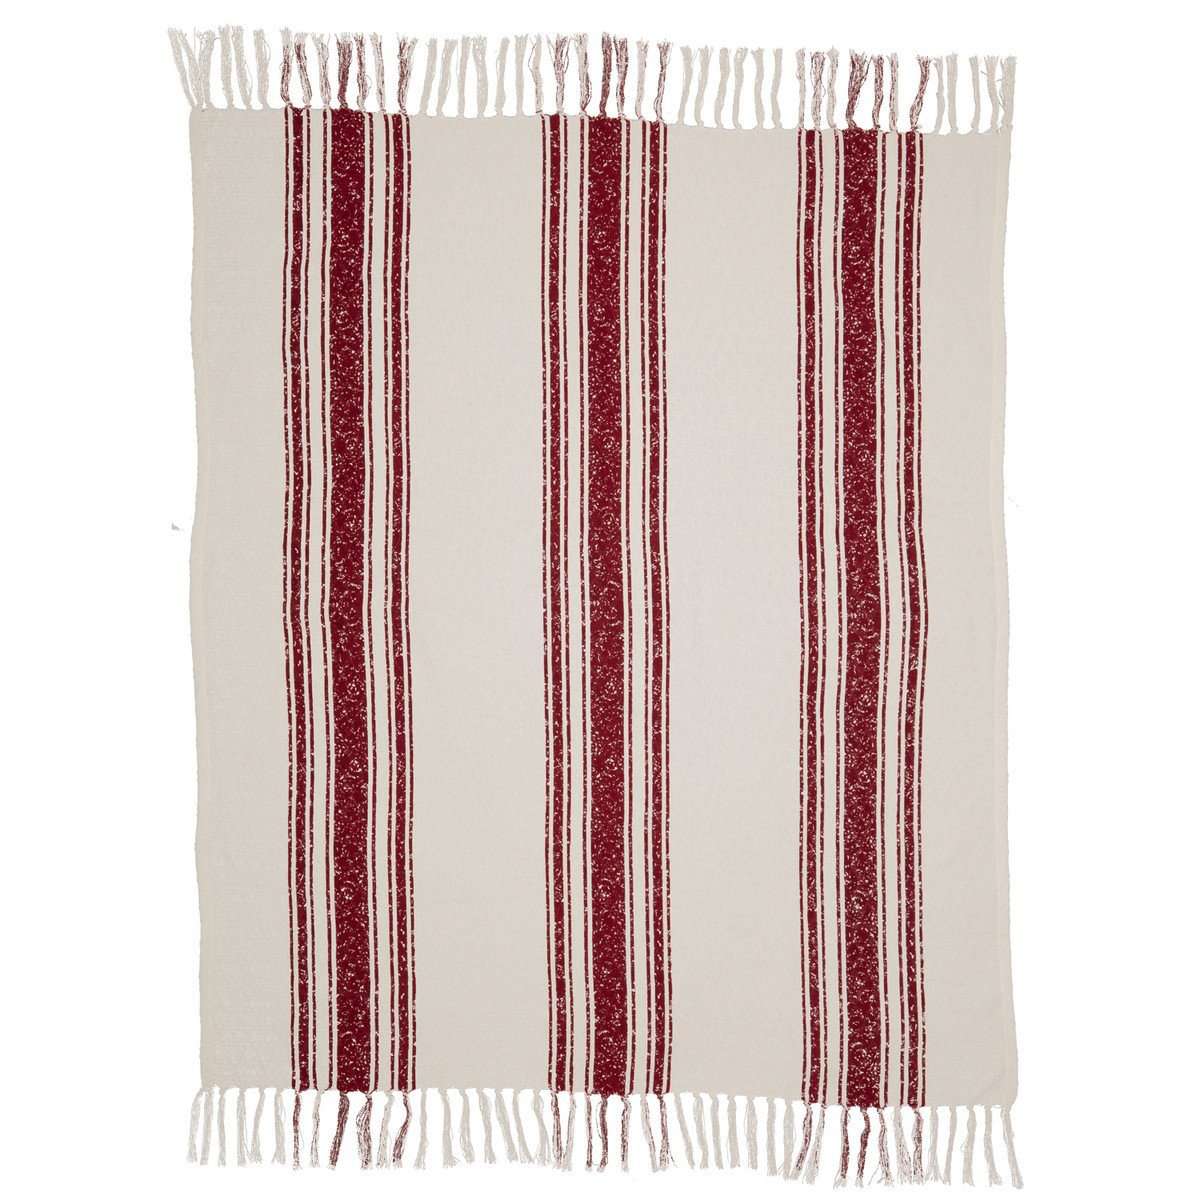 Antique Red Stripe Woven Throw 60" x 50" White, Red VHC Brands - The Fox Decor